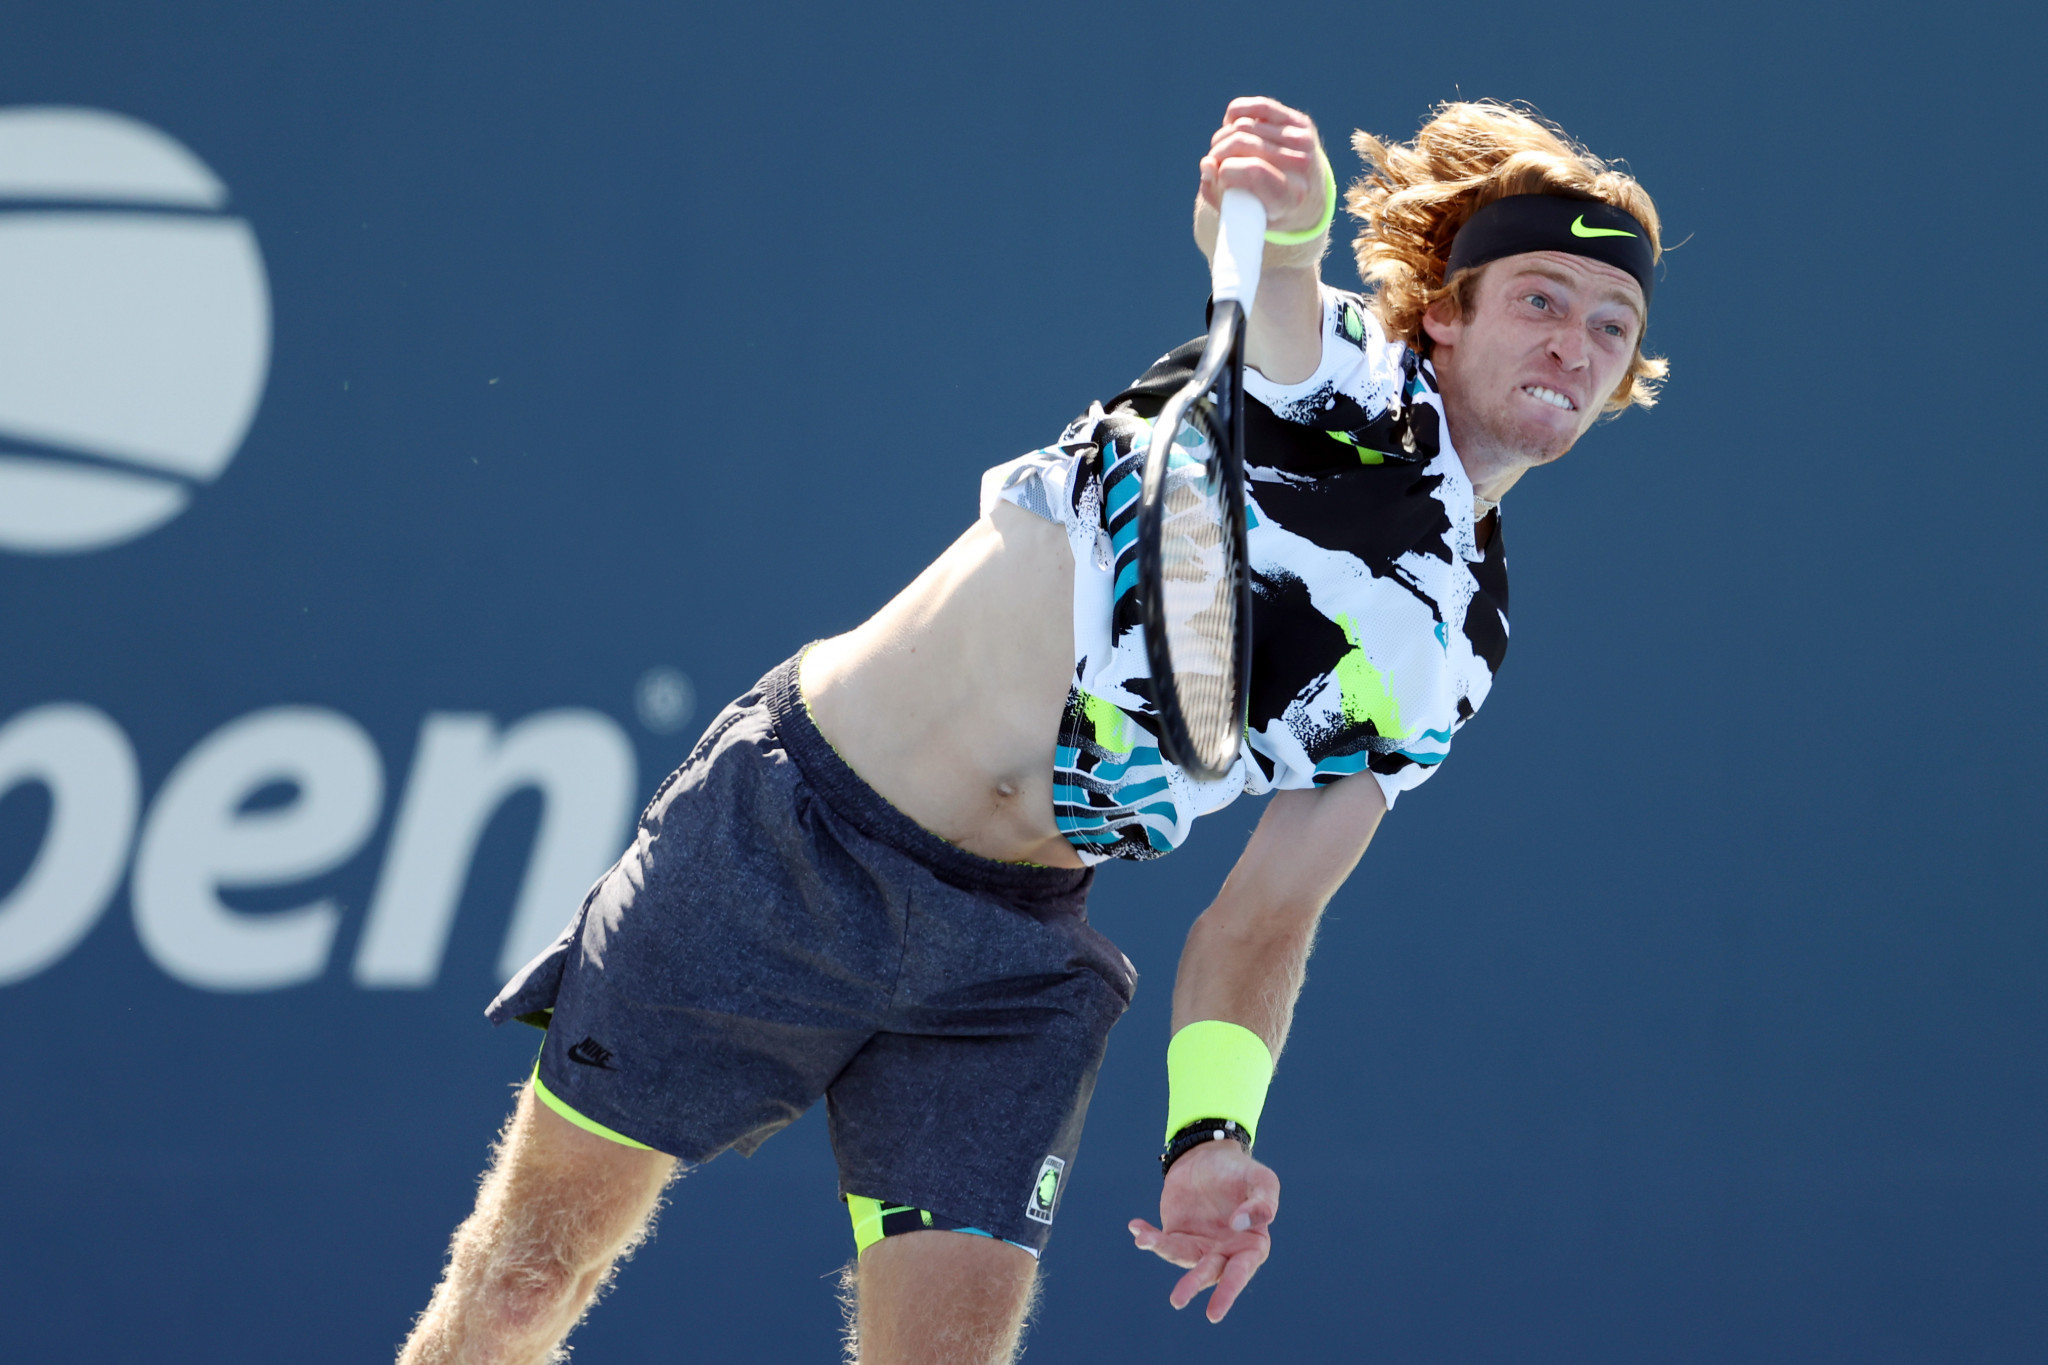 Another Russian in the fourth round is Andrey Rublev, who beat Italy's Salvatore Caruso 6-0, 6-4, 6-0.©Getty Images